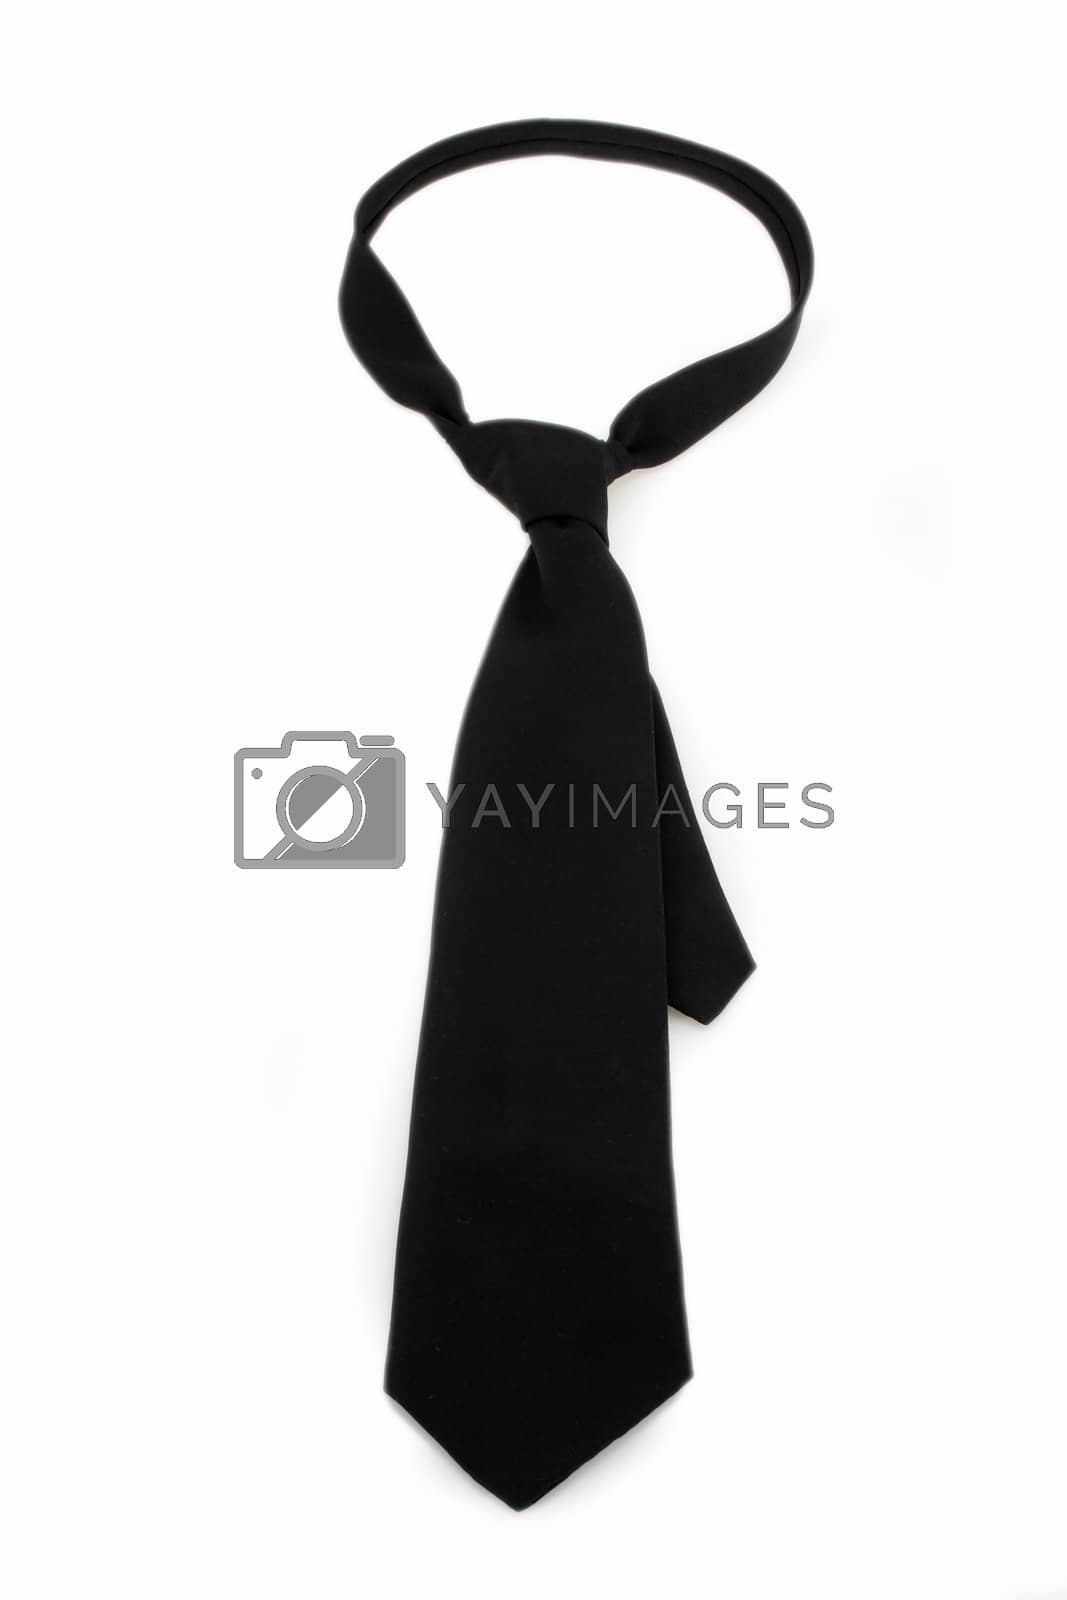 Royalty free image of Necktie by Teamarbeit